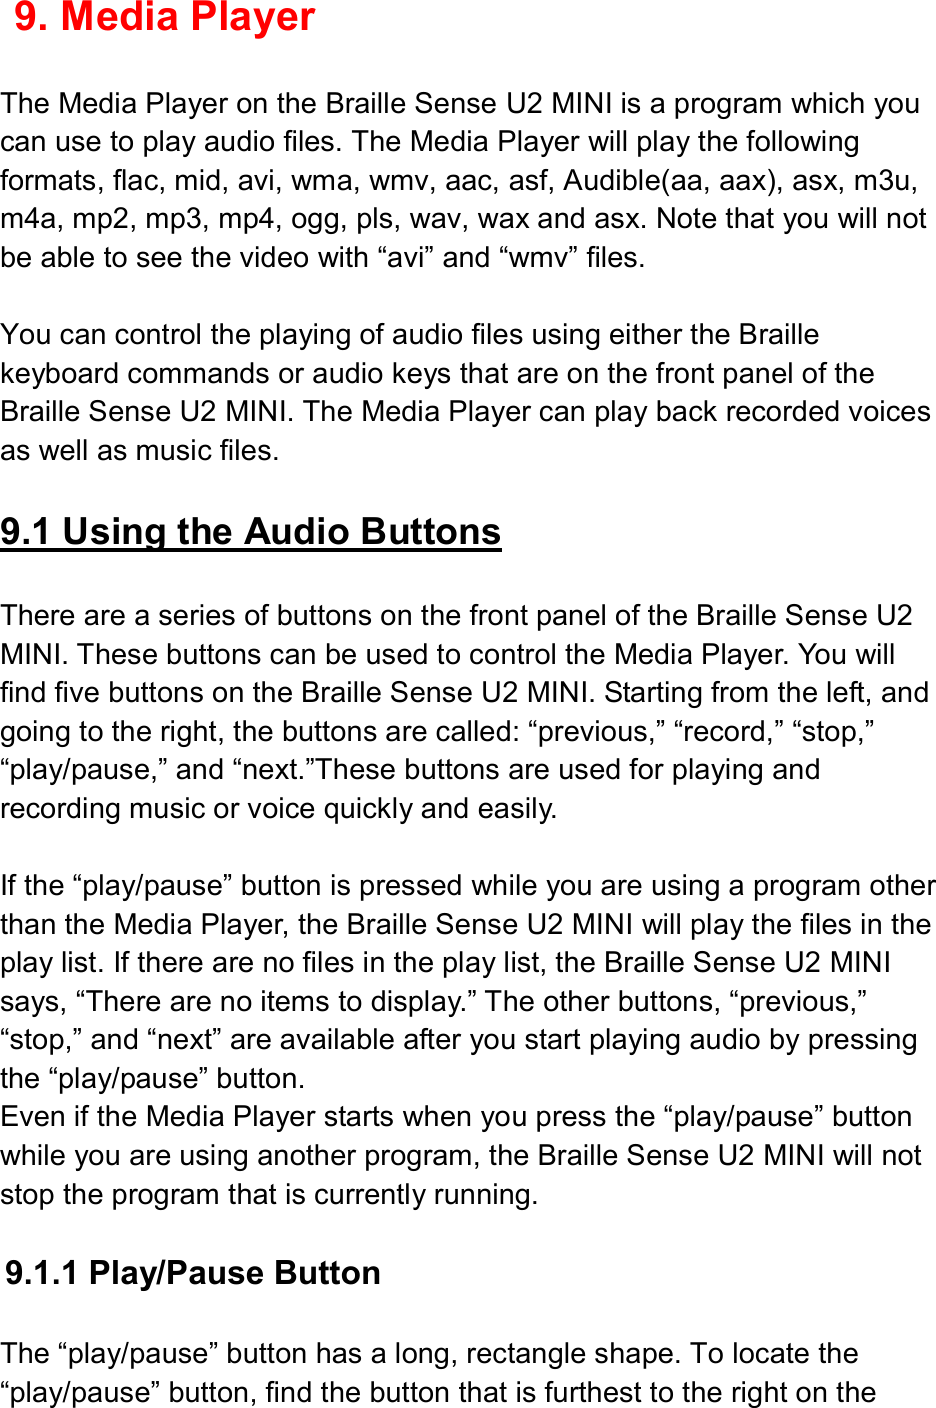  9. Media Player  The Media Player on the Braille Sense U2 MINI is a program which you can use to play audio files. The Media Player will play the following formats, flac, mid, avi, wma, wmv, aac, asf, Audible(aa, aax), asx, m3u, m4a, mp2, mp3, mp4, ogg, pls, wav, wax and asx. Note that you will not be able to see the video with “avi” and “wmv” files.  You can control the playing of audio files using either the Braille keyboard commands or audio keys that are on the front panel of the Braille Sense U2 MINI. The Media Player can play back recorded voices as well as music files.  9.1 Using the Audio Buttons  There are a series of buttons on the front panel of the Braille Sense U2 MINI. These buttons can be used to control the Media Player. You will find five buttons on the Braille Sense U2 MINI. Starting from the left, and going to the right, the buttons are called: “previous,” “record,” “stop,” “play/pause,” and “next.”These buttons are used for playing and recording music or voice quickly and easily.  If the “play/pause” button is pressed while you are using a program other than the Media Player, the Braille Sense U2 MINI will play the files in the play list. If there are no files in the play list, the Braille Sense U2 MINI says, “There are no items to display.” The other buttons, “previous,” “stop,” and “next” are available after you start playing audio by pressing the “play/pause” button. Even if the Media Player starts when you press the “play/pause” button while you are using another program, the Braille Sense U2 MINI will not stop the program that is currently running.  9.1.1 Play/Pause Button  The “play/pause” button has a long, rectangle shape. To locate the “play/pause” button, find the button that is furthest to the right on the 